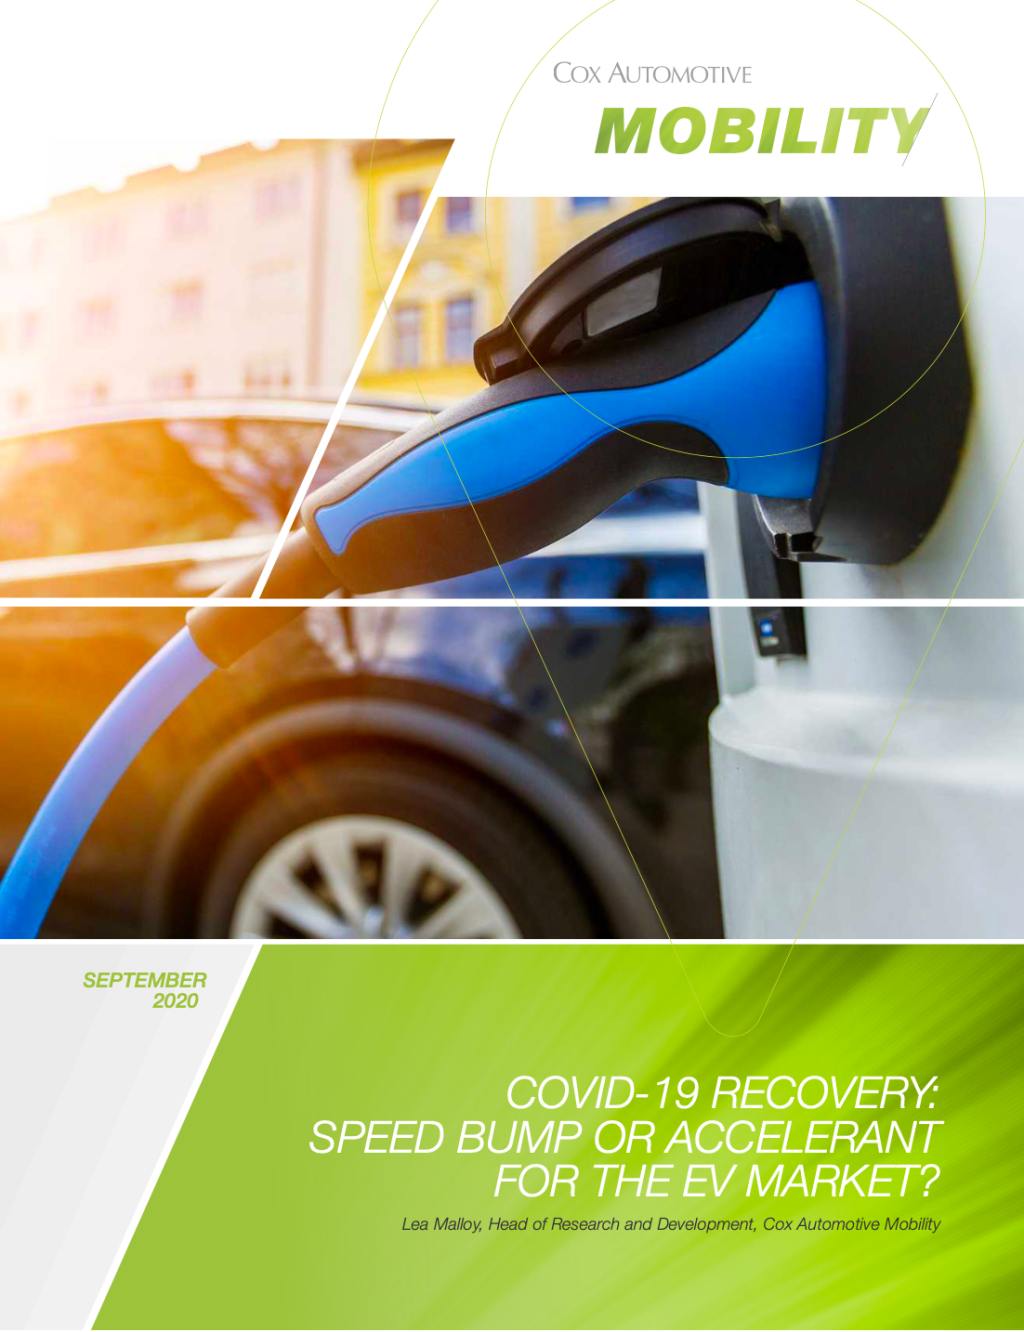 https://www.coxautoinc.com/wp-content/uploads/2020/09/Whitepaper-COVID-19-RECOVERY-SPEED-BUMP-OR-ACCELERANT-FOR-THE-EV-MARKET.png?w=1024